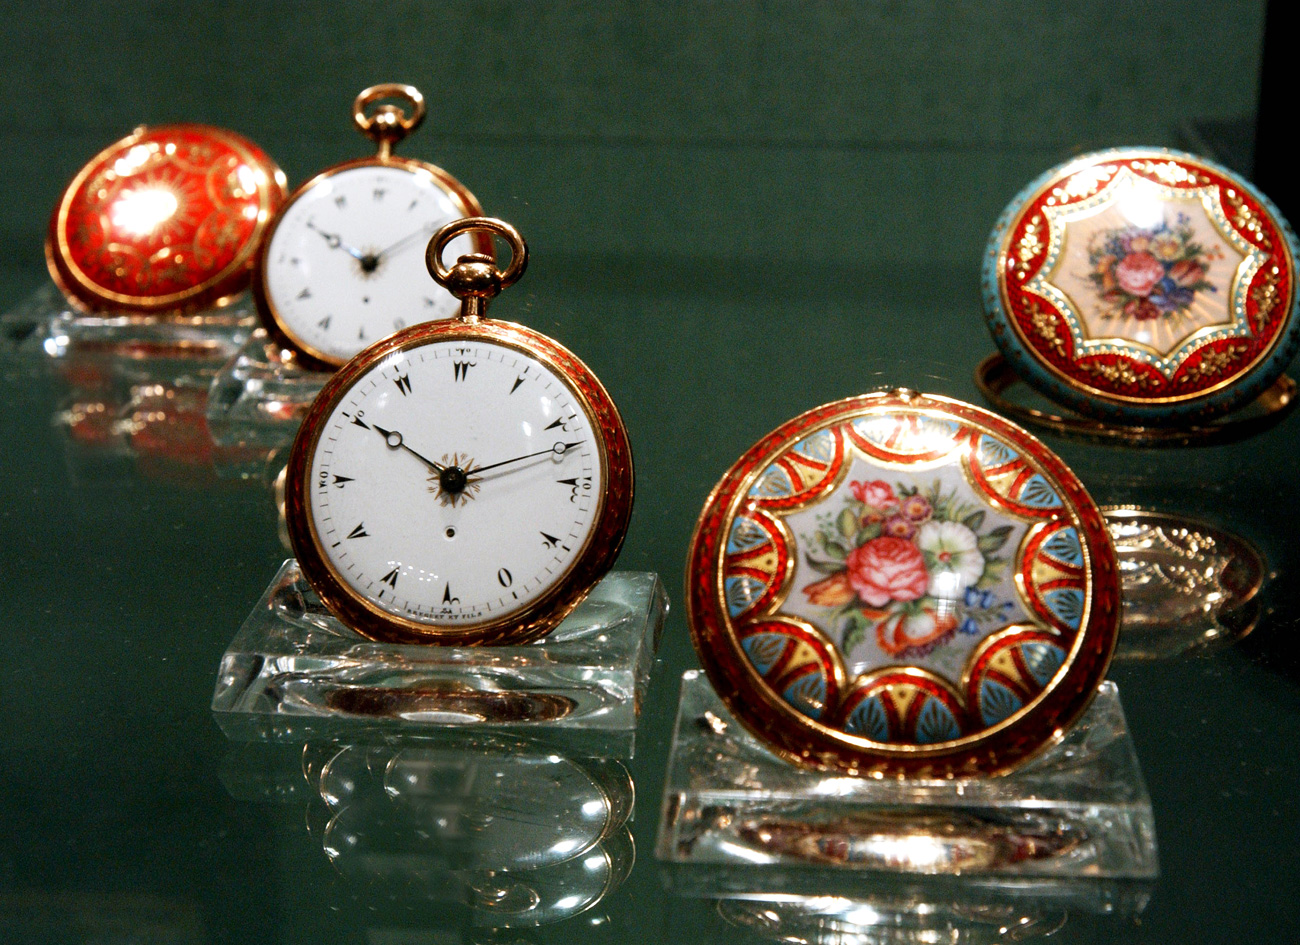 Early 19th century's clocks (in pic) are displayed at an exhibition of antique Breguet timepieces which has opened in St.Petersburg's State Hermitage Museum. 